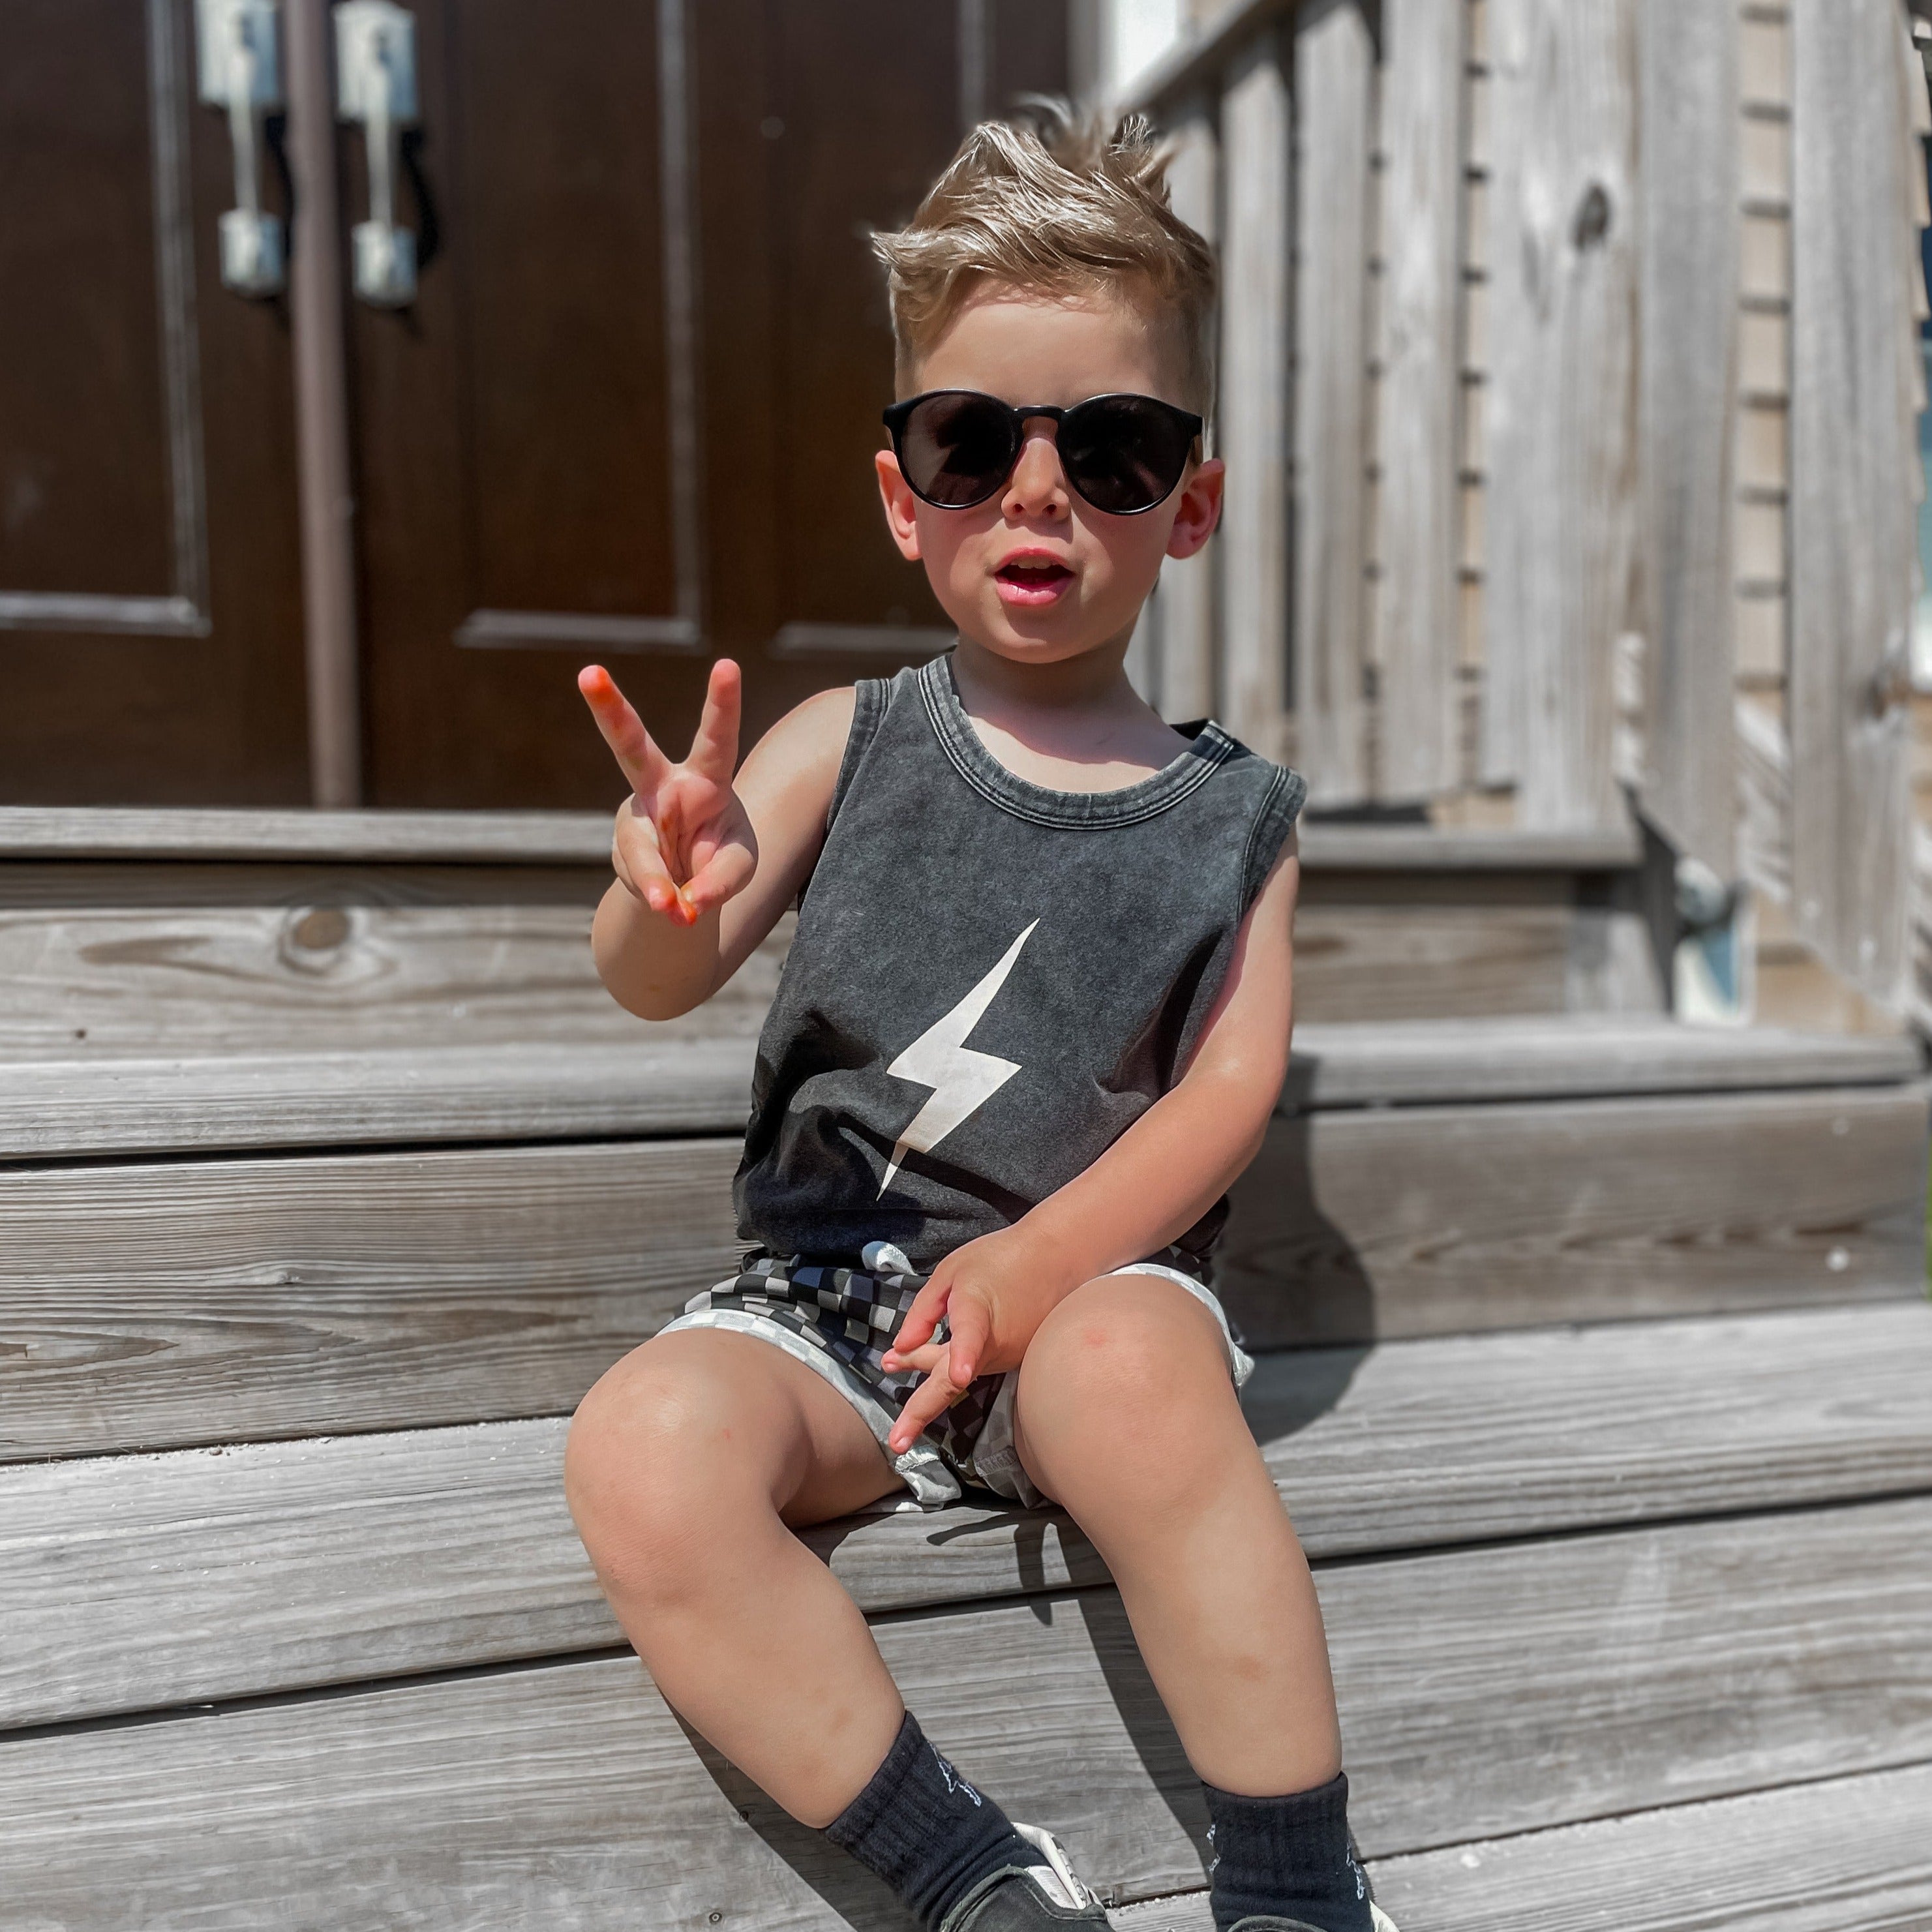 SPARK MUSCLE-TANK - VINTAGE BLACK - GRAPHIC TEES FOR BOYS - LITTLE RAD THINGS